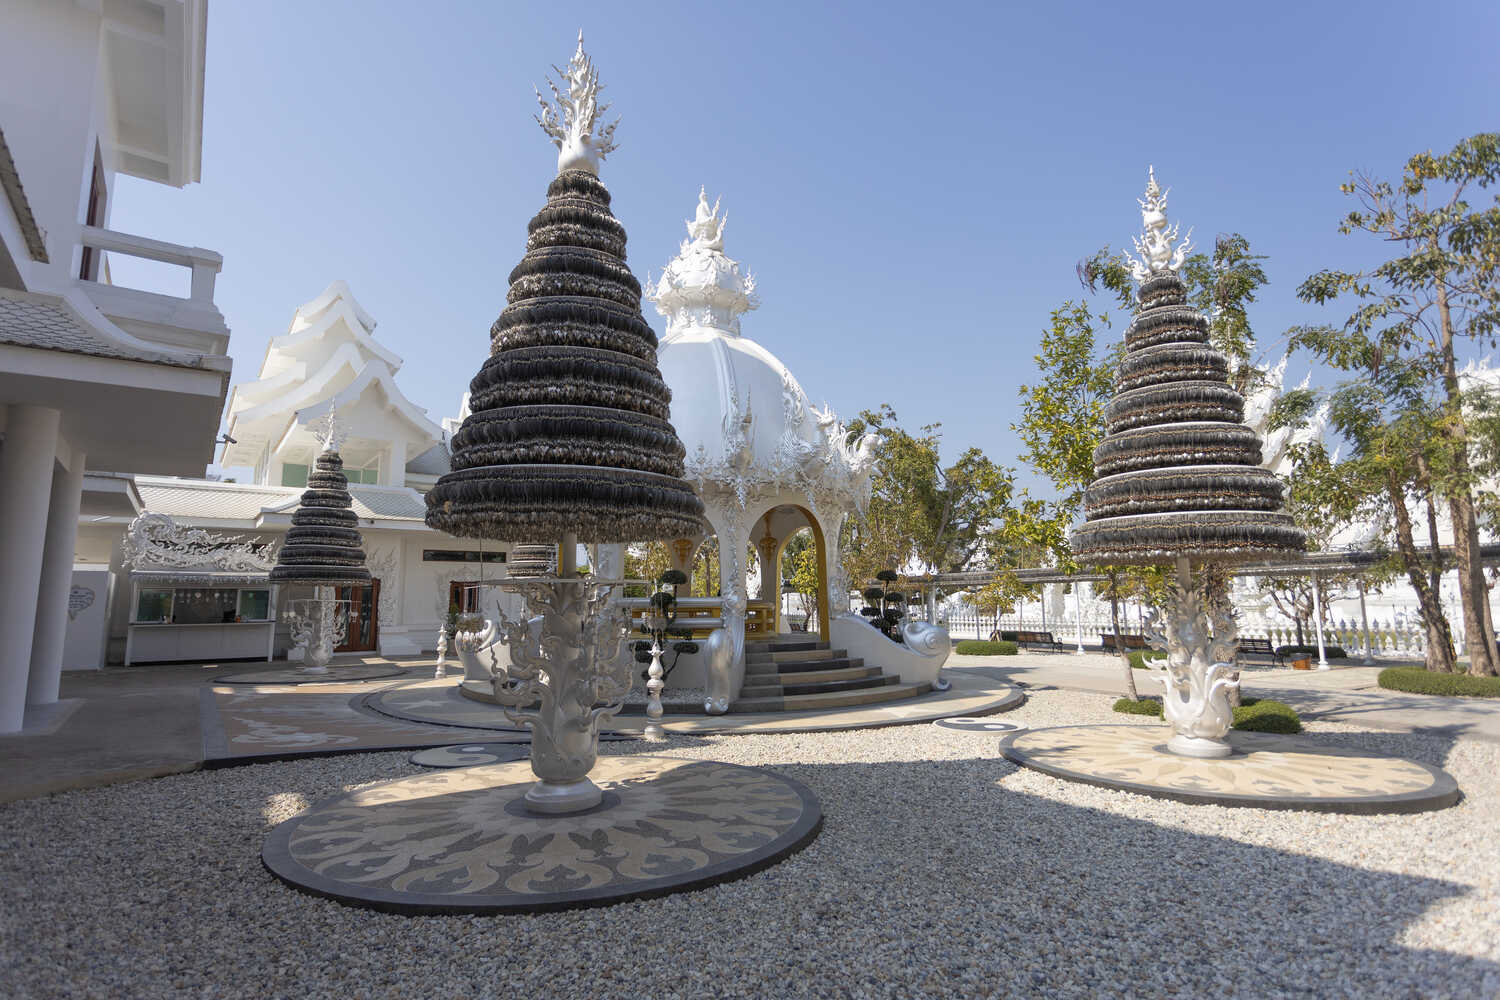 Inside the white temple in Chiang Rai